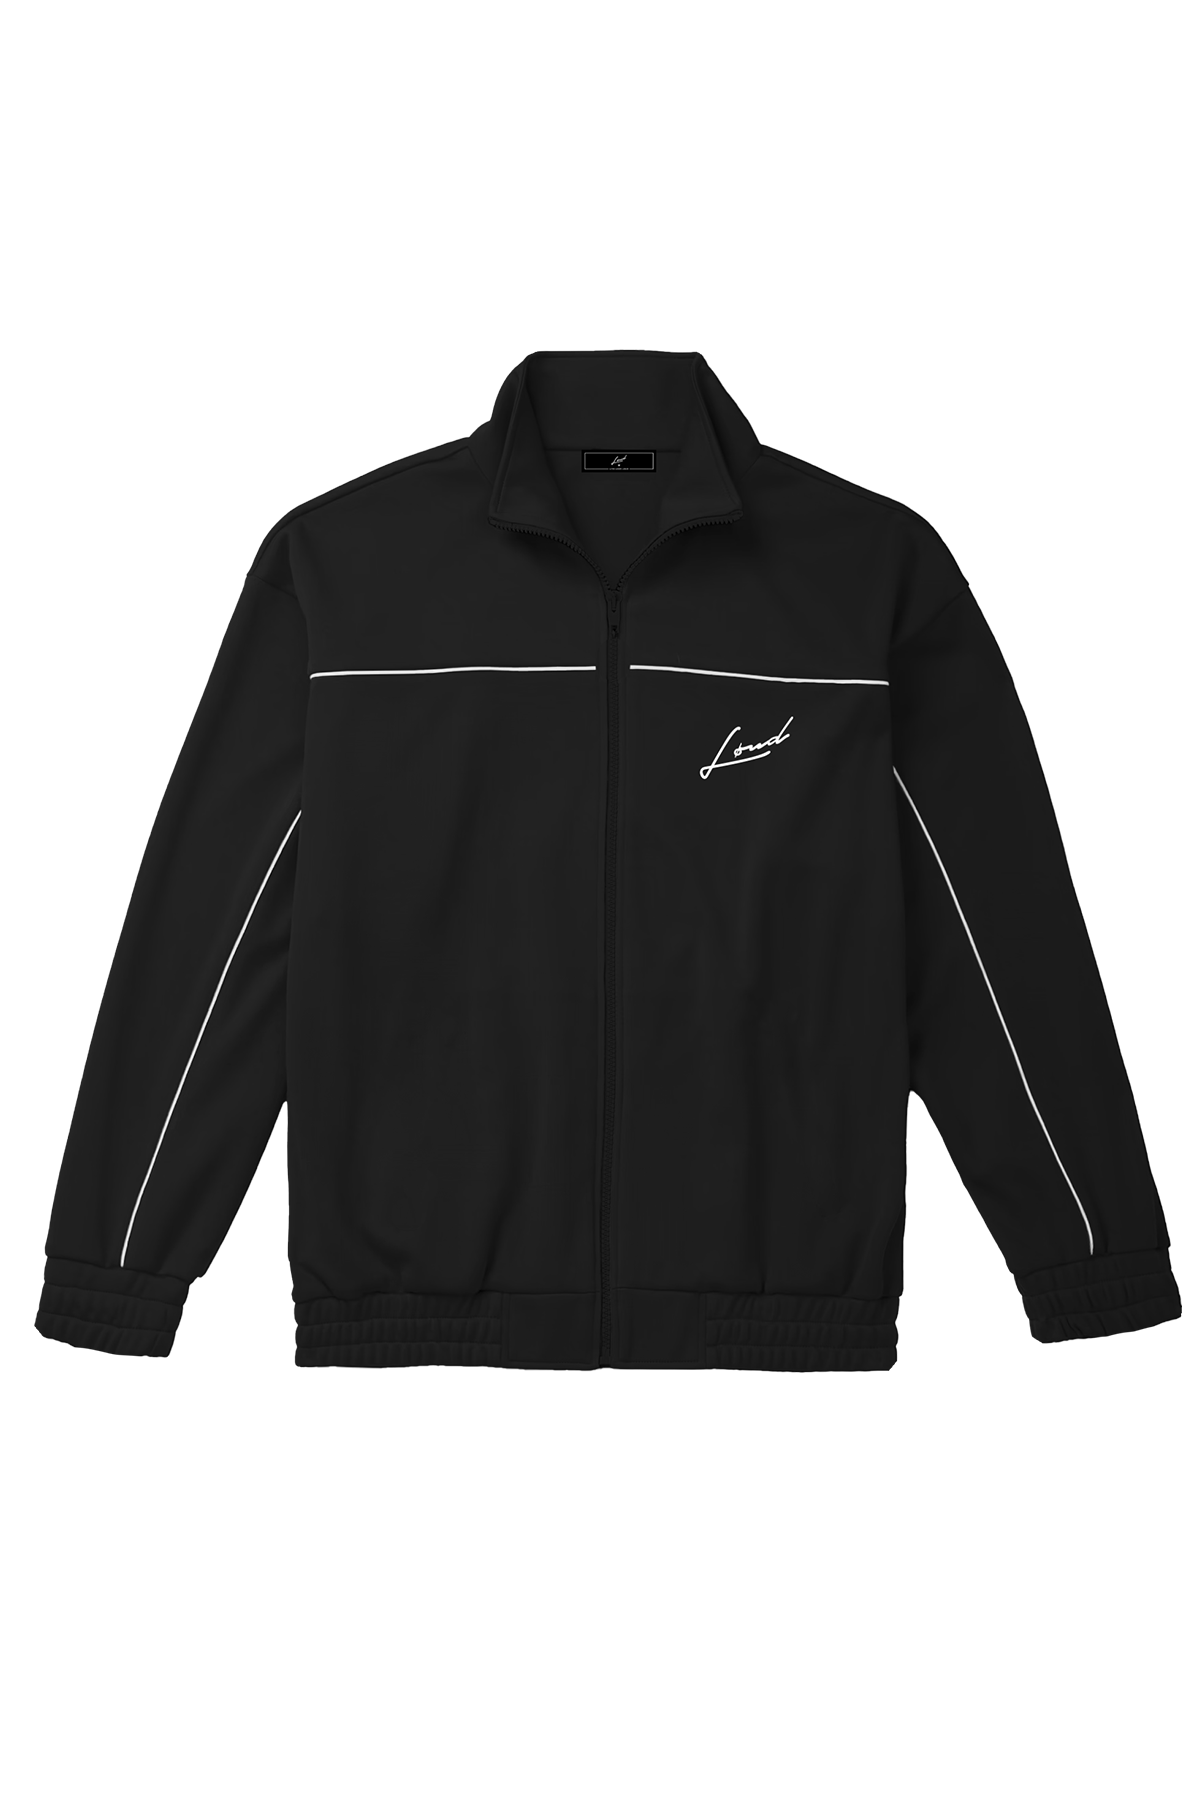 Loud Black with White Piping Tracksuit Jacket - Live Look Loud